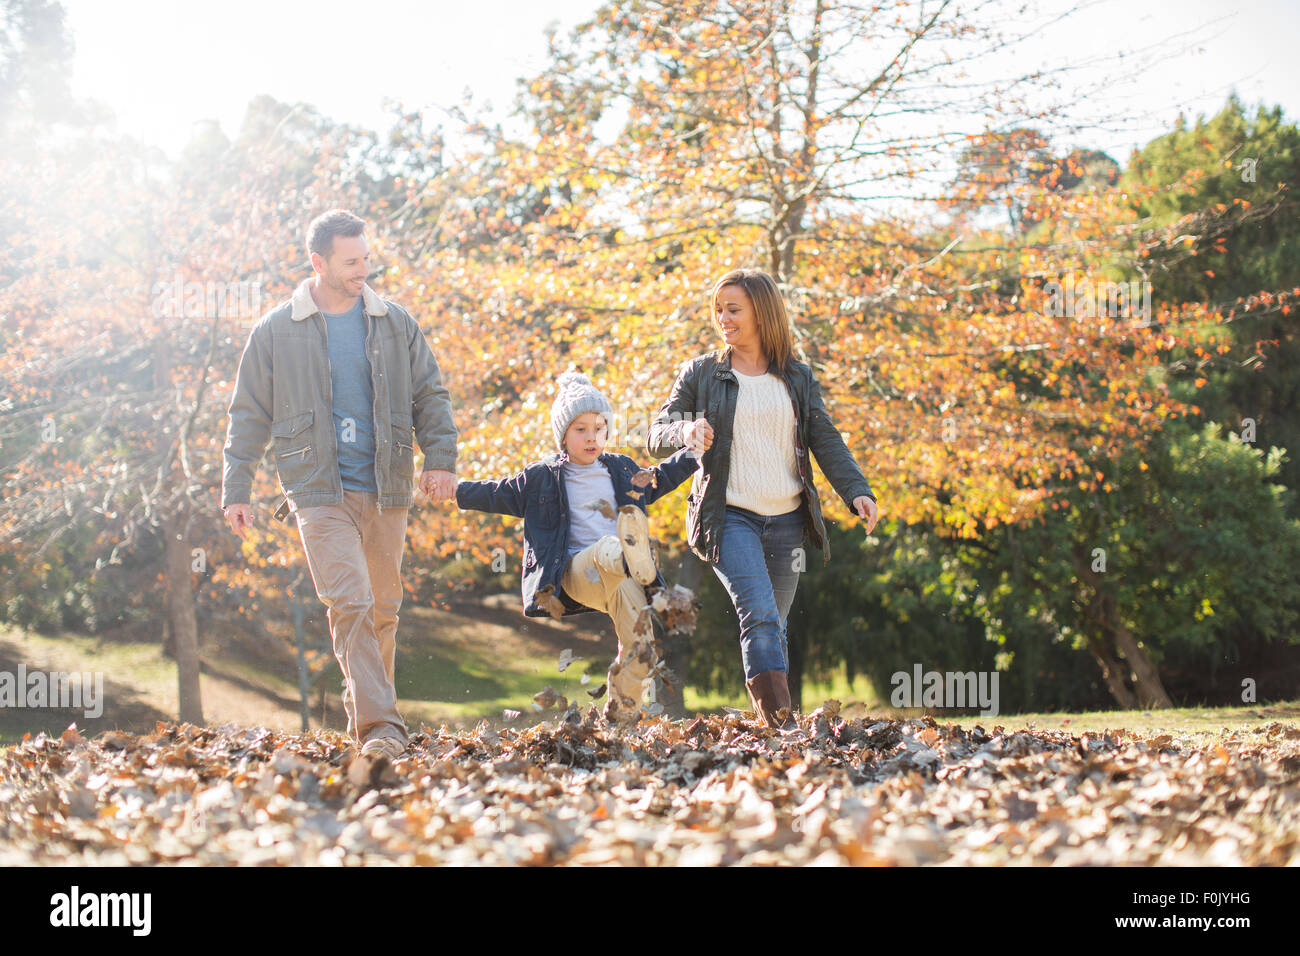 Family holding hands and walking in autumn leaves Stock Photo